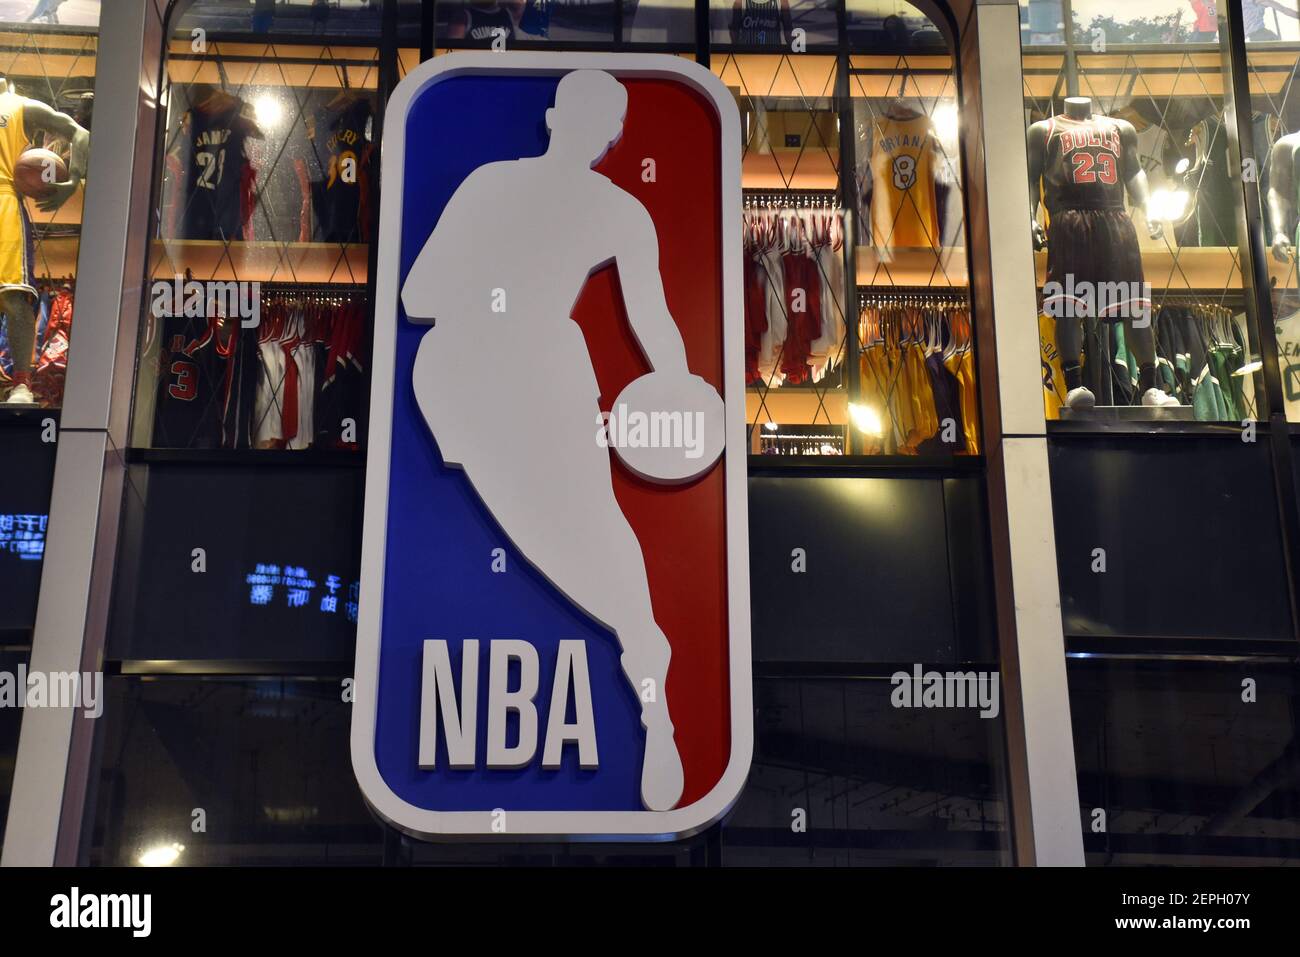 NBA Continues International Expansion With Beijing Flagship Store